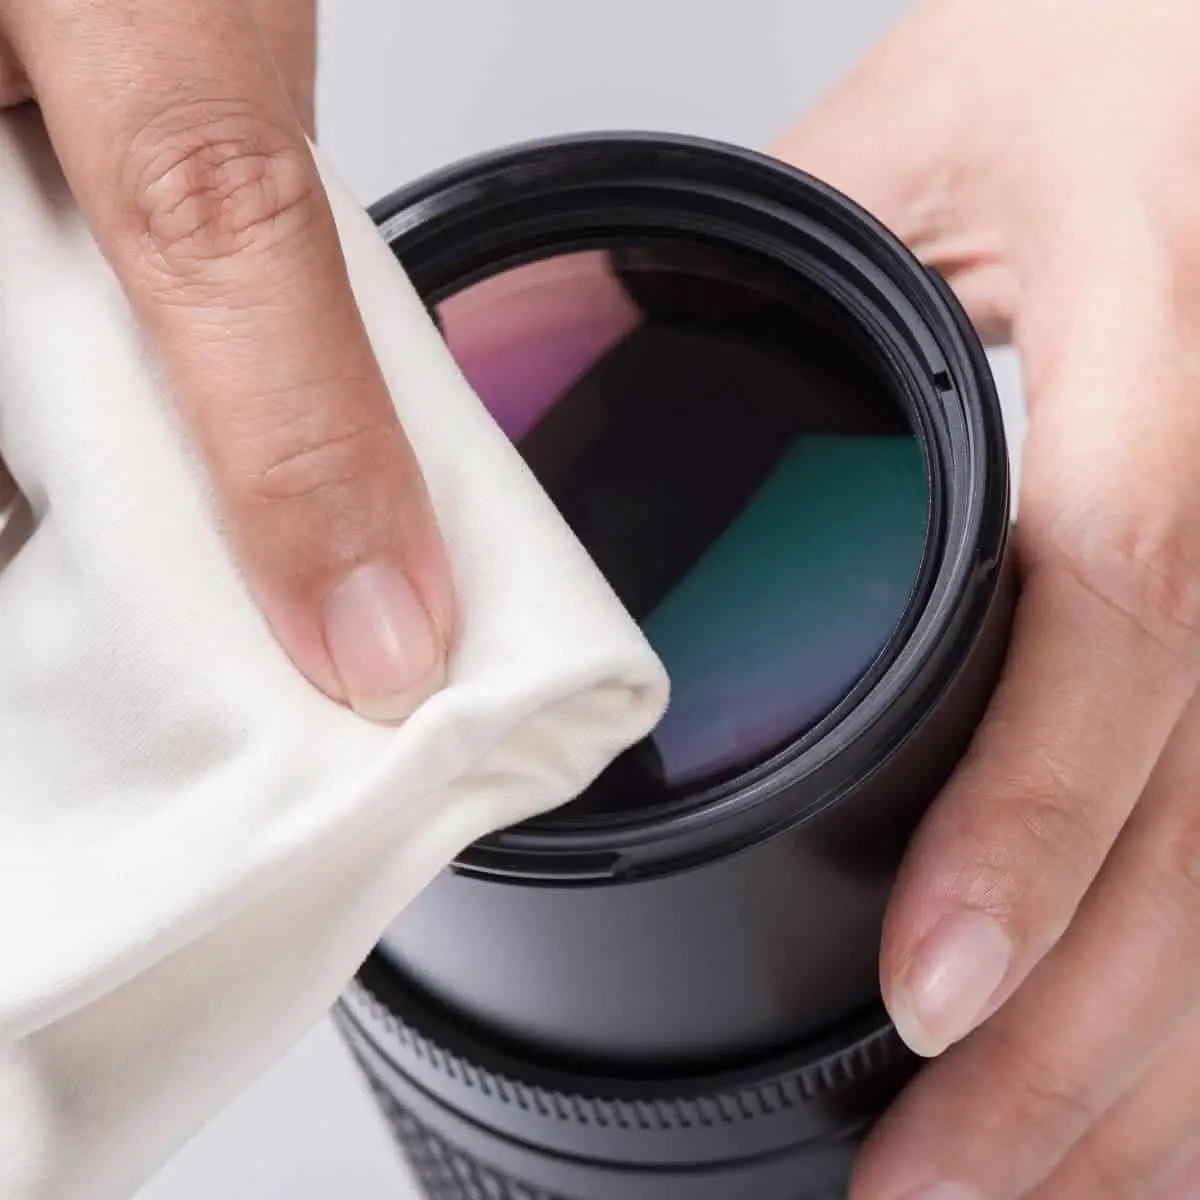 Clean the PS Camera's rear camera lens using soft cloth or tissue by gently wiping the lens.